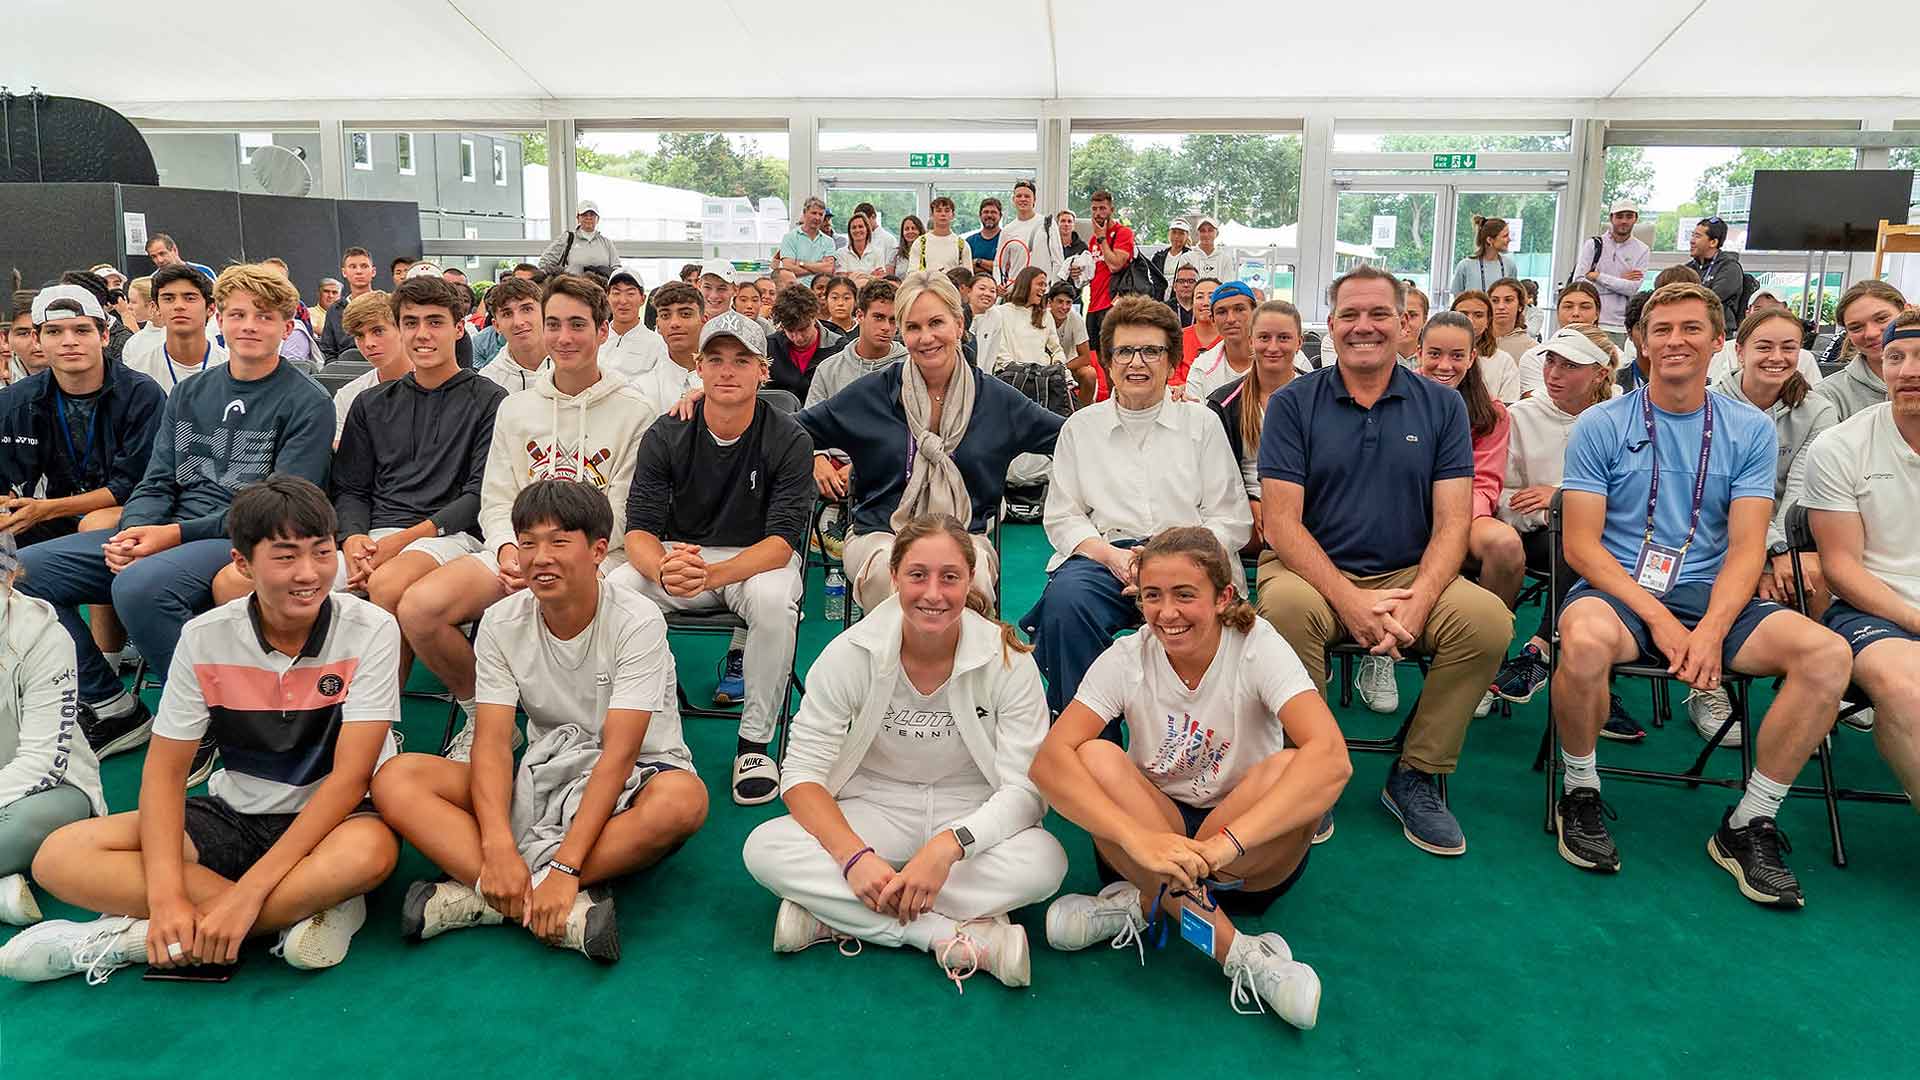 Former World No. 74 Nicolas Pereira and current No. 188 Kimmer Coppejans joined Billie Jean King on Tuesday at Wimbledon's Junior Education Session.